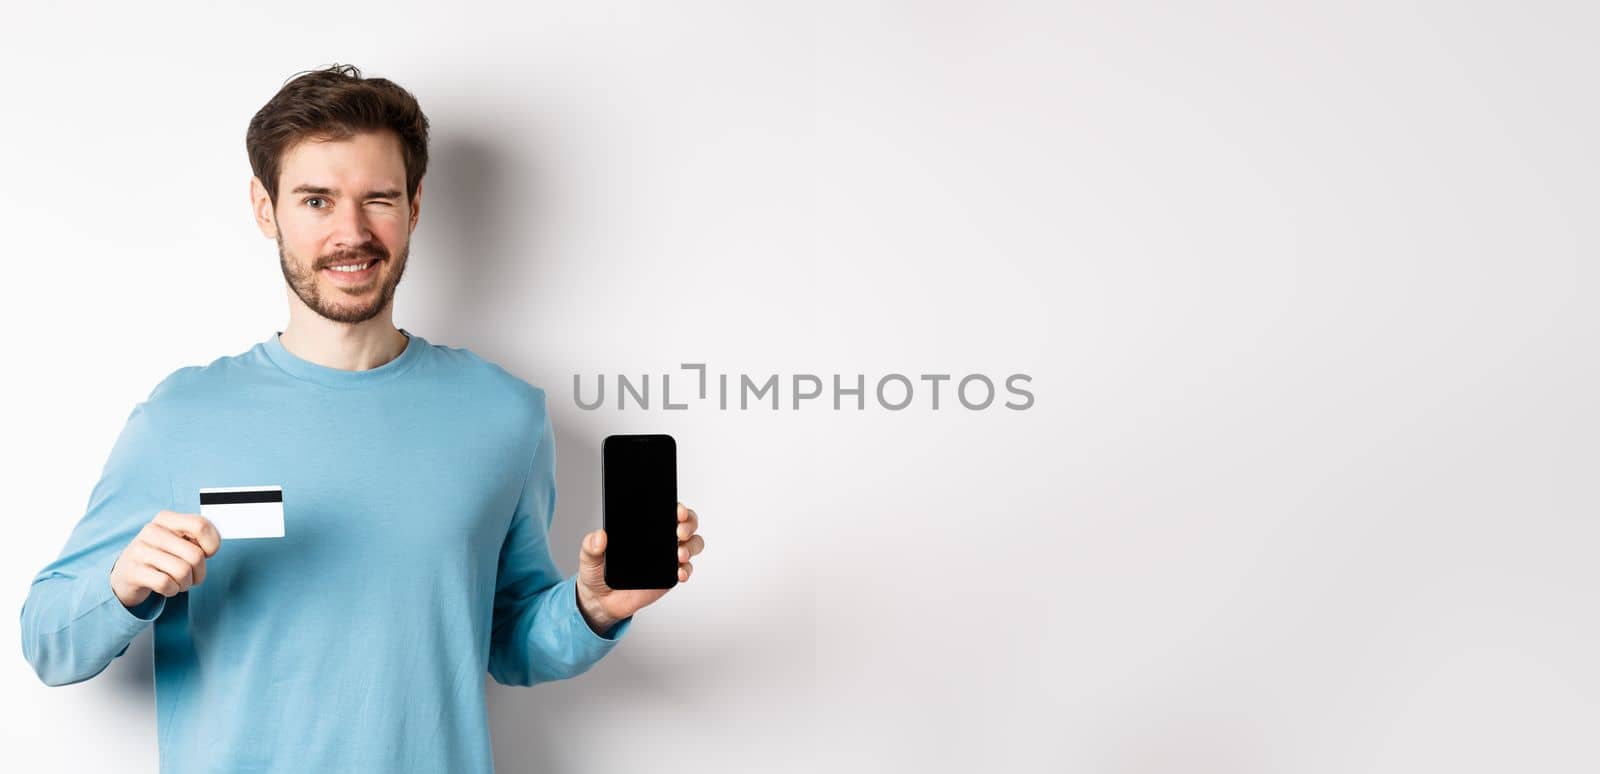 Young man in casual shirt showing empty smartphone screen and plastic credit card, winking and smiling at camera, standing on white background.